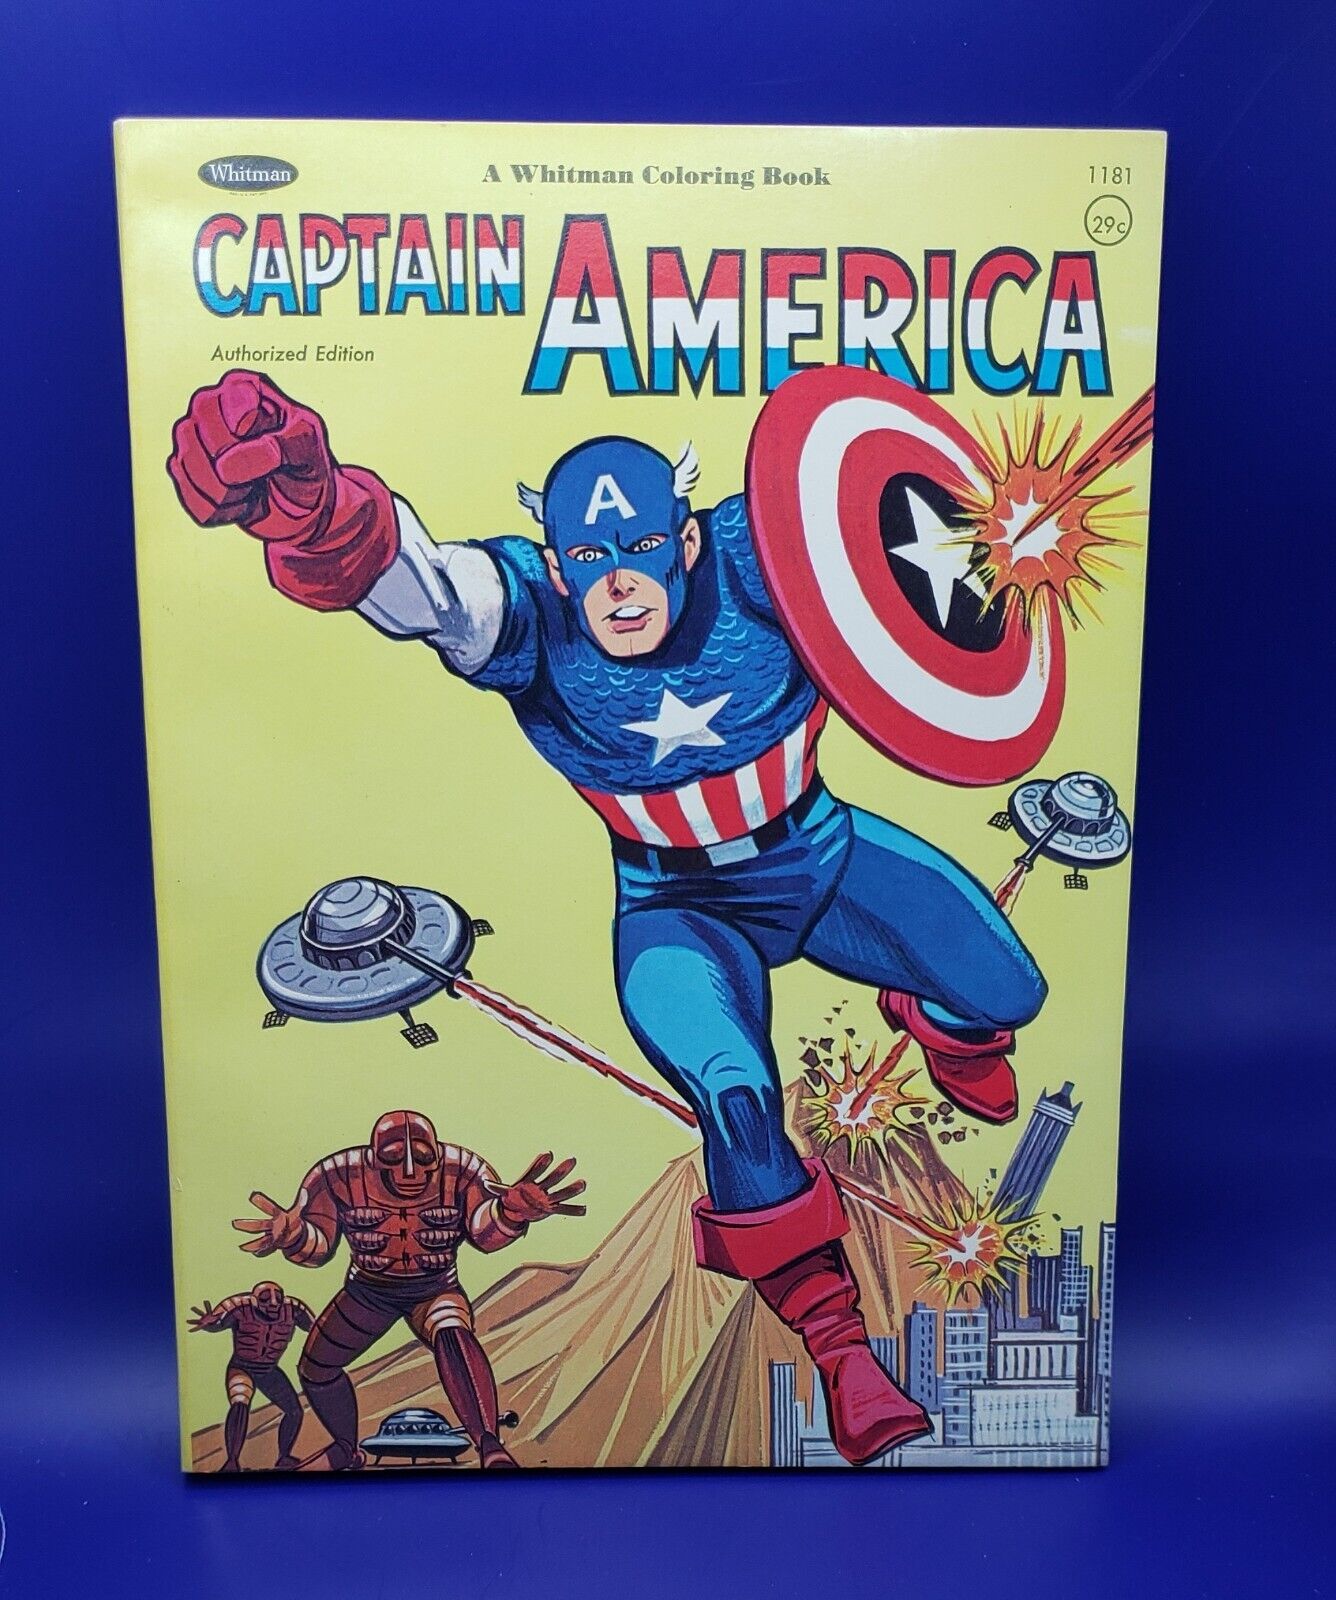 Vintage Captain America Coloring Book Whitman 1966 - UNUSED NOT Colored